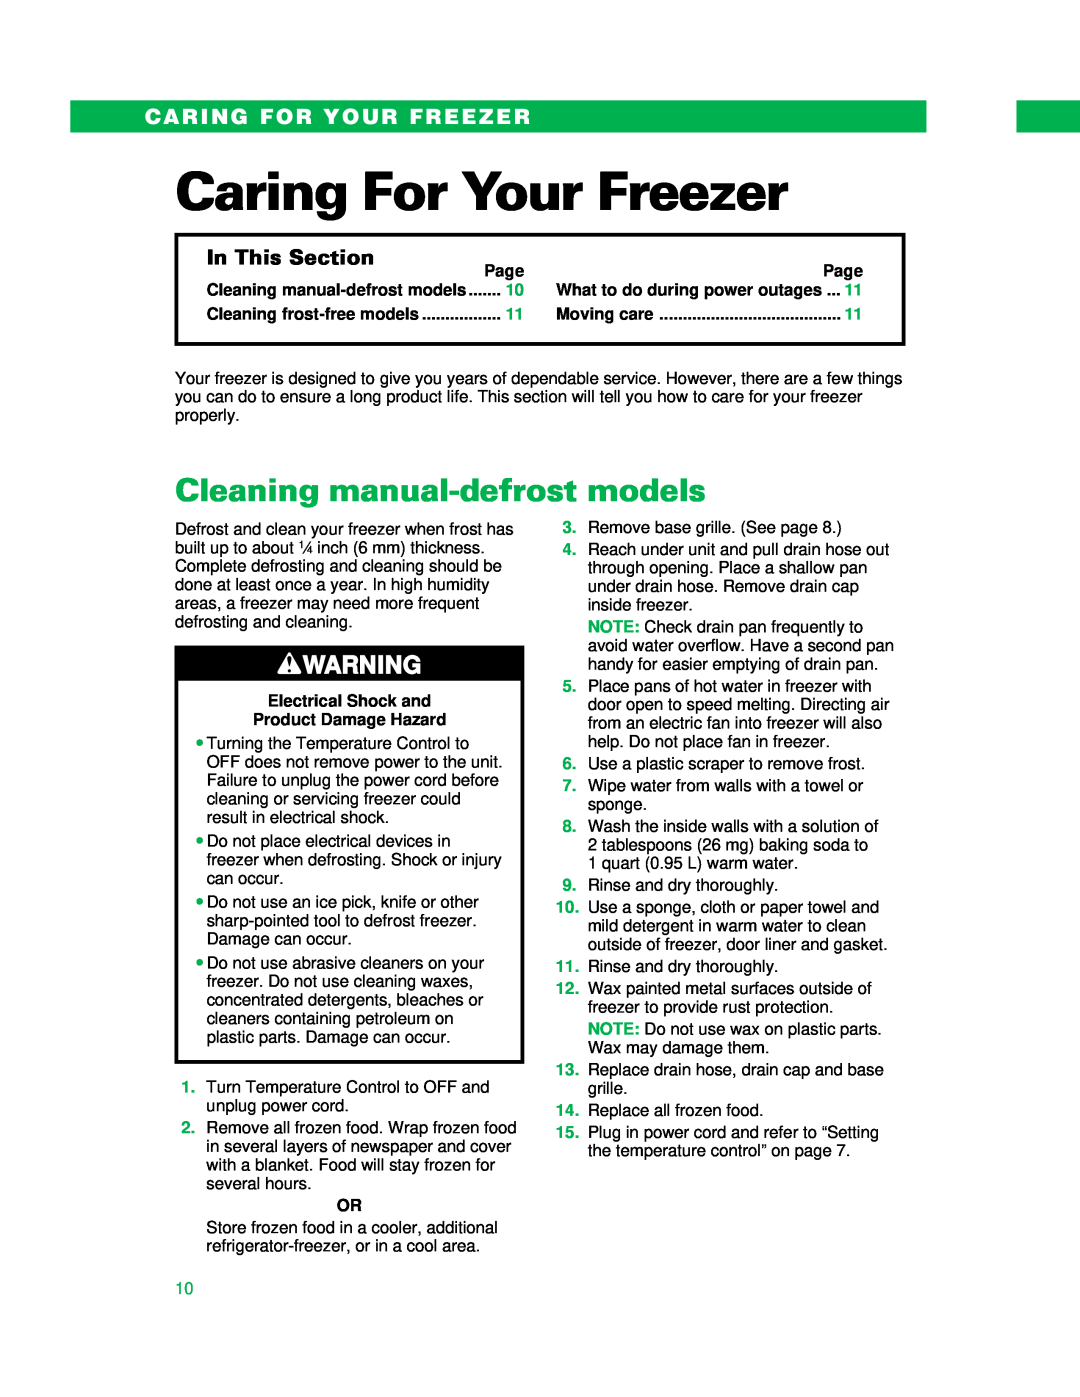 Whirlpool UPRIGHT FREEZER Caring For Your Freezer, Cleaning manual-defrostmodels, In This Section, Page 